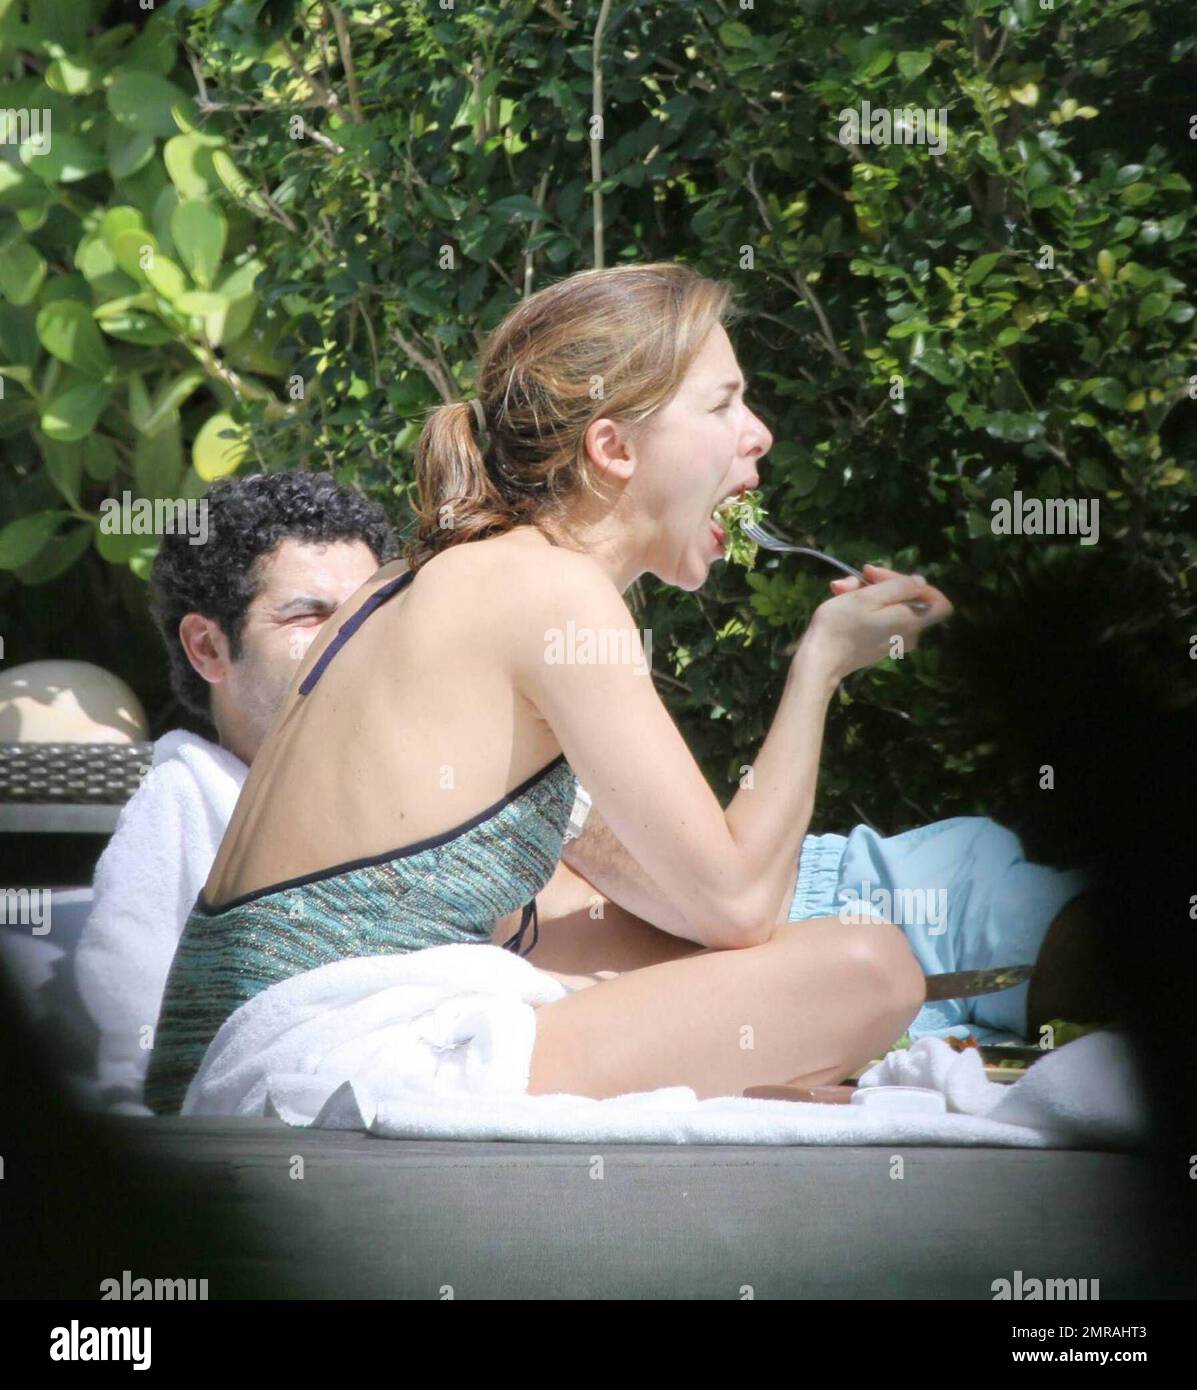 French actor Jamel Debbouze and wife Melissa Theuriau enjoy a day in the sun wearing bathing suits at their exclusive Miami Beach hotel pool.  The couple had lunch and were very intimate together, kissing and cuddling in front of hotel guests. Miami Beach, Florida. 2/23/09 Stock Photo